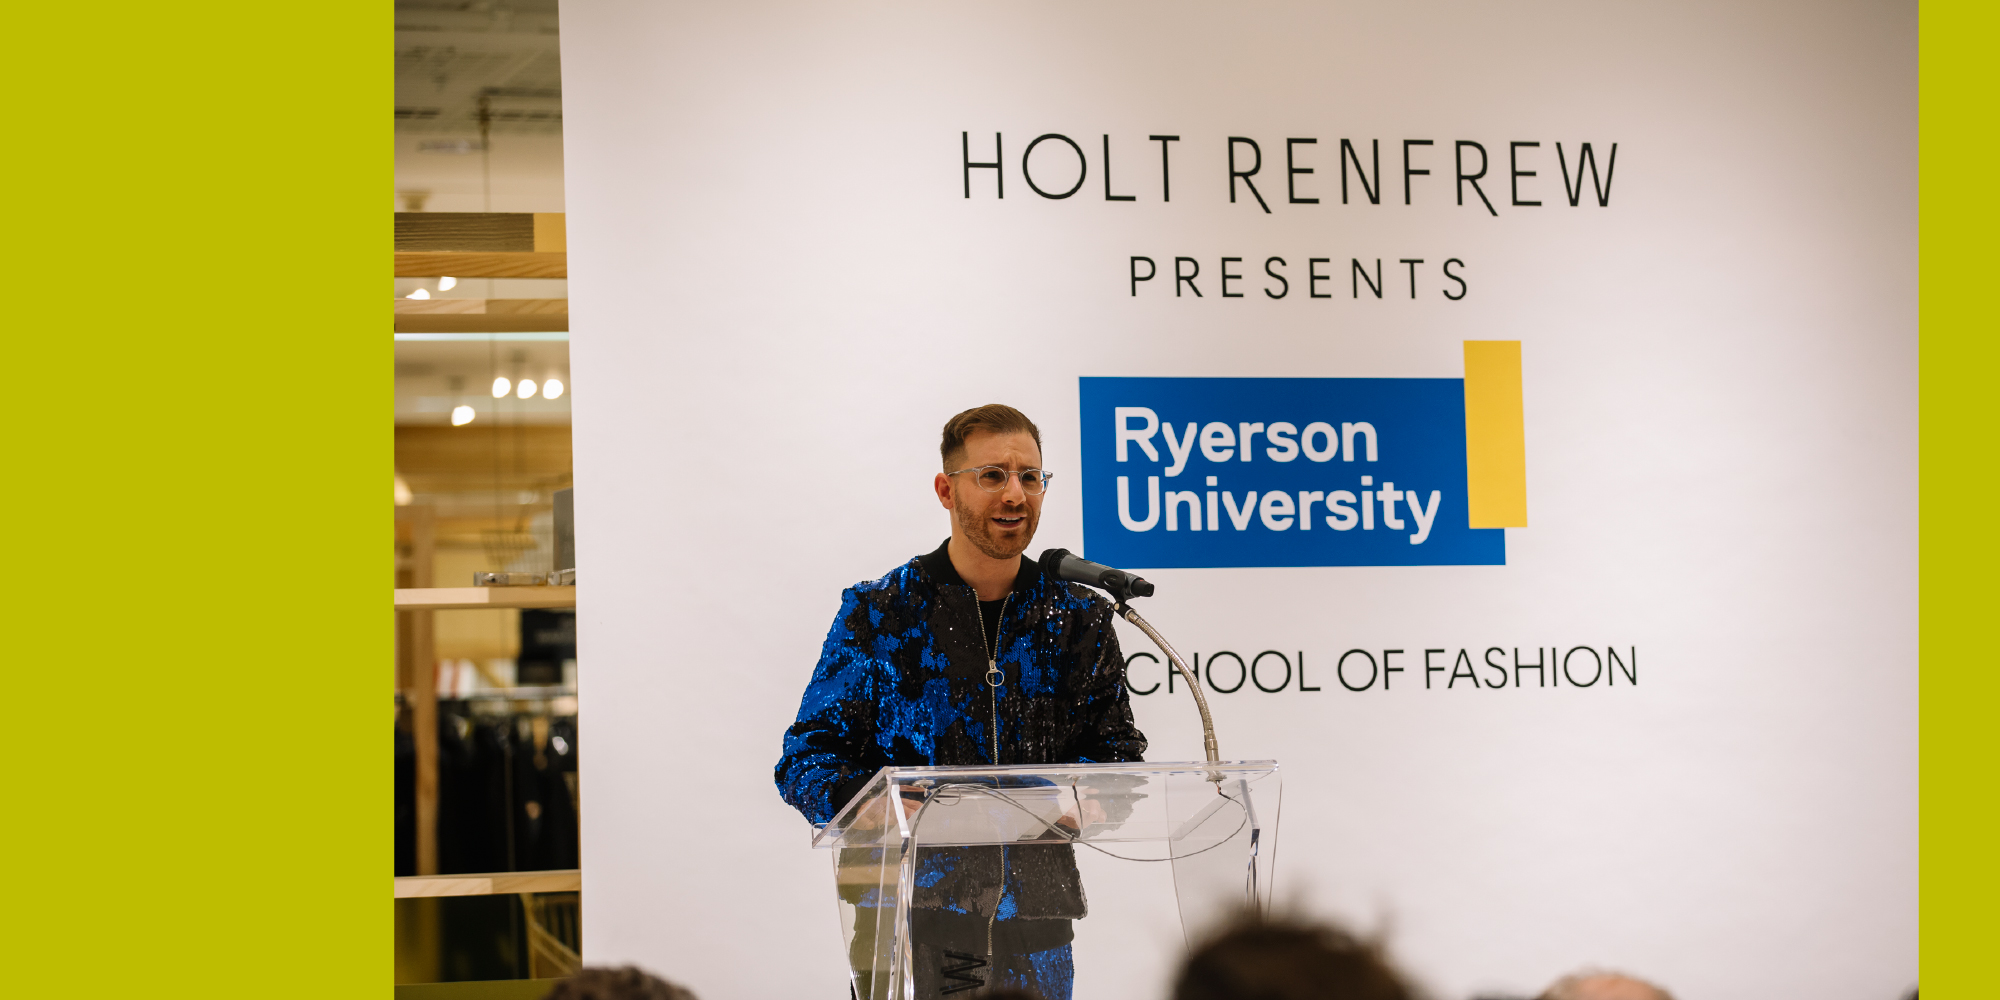 Dr. Ben Barry at the podium at Awards Night with a backdrop that reads "Holt Renfrew presents Ryerson University School of Fashion"